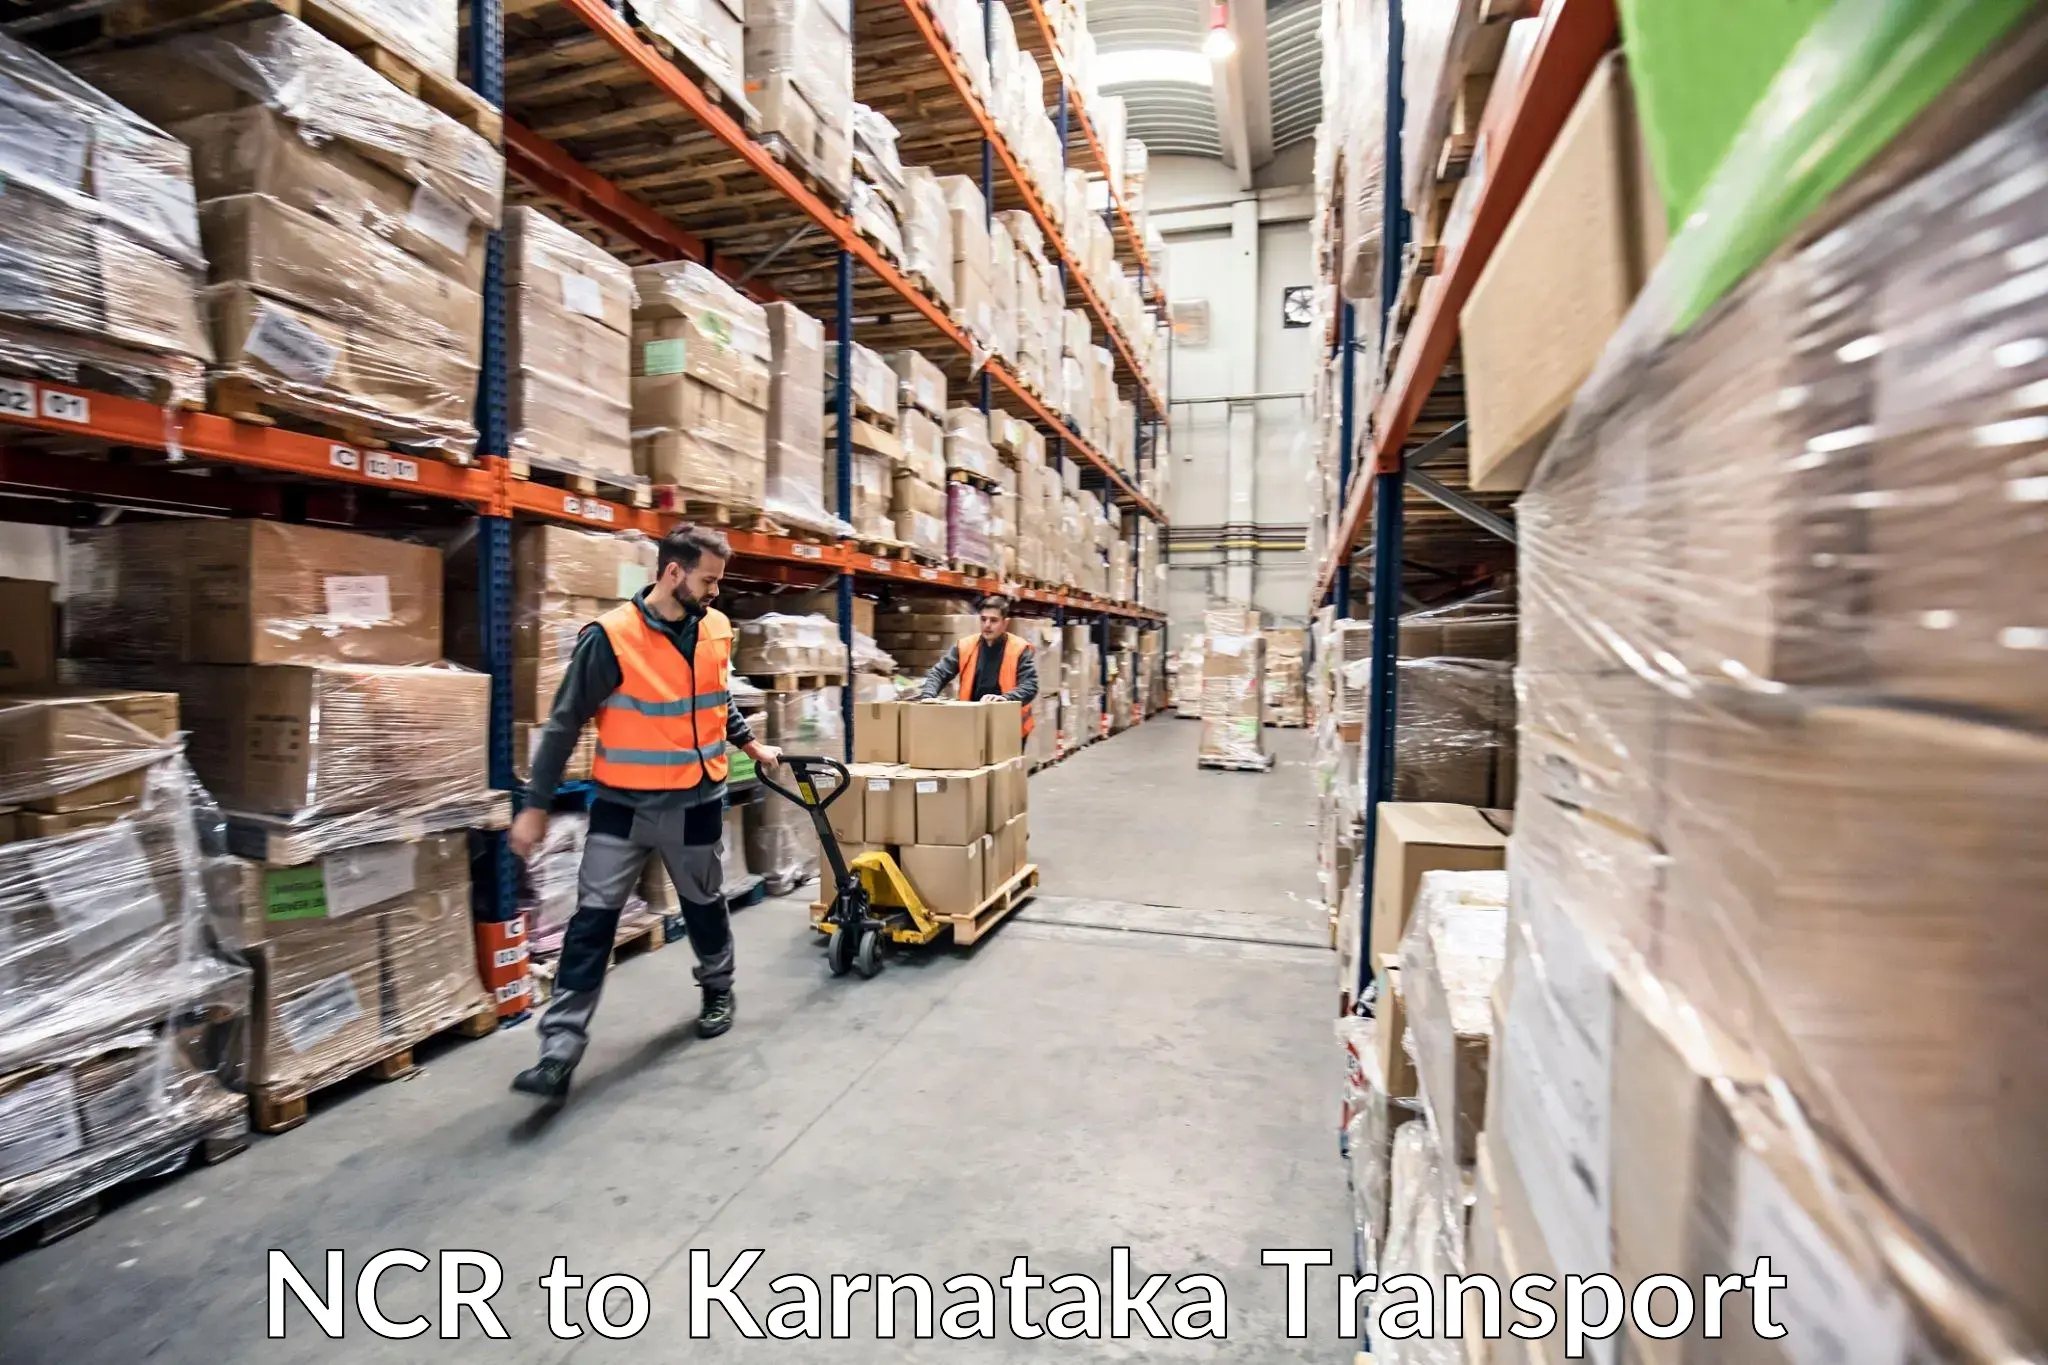 Part load transport service in India NCR to Chikkamagalur